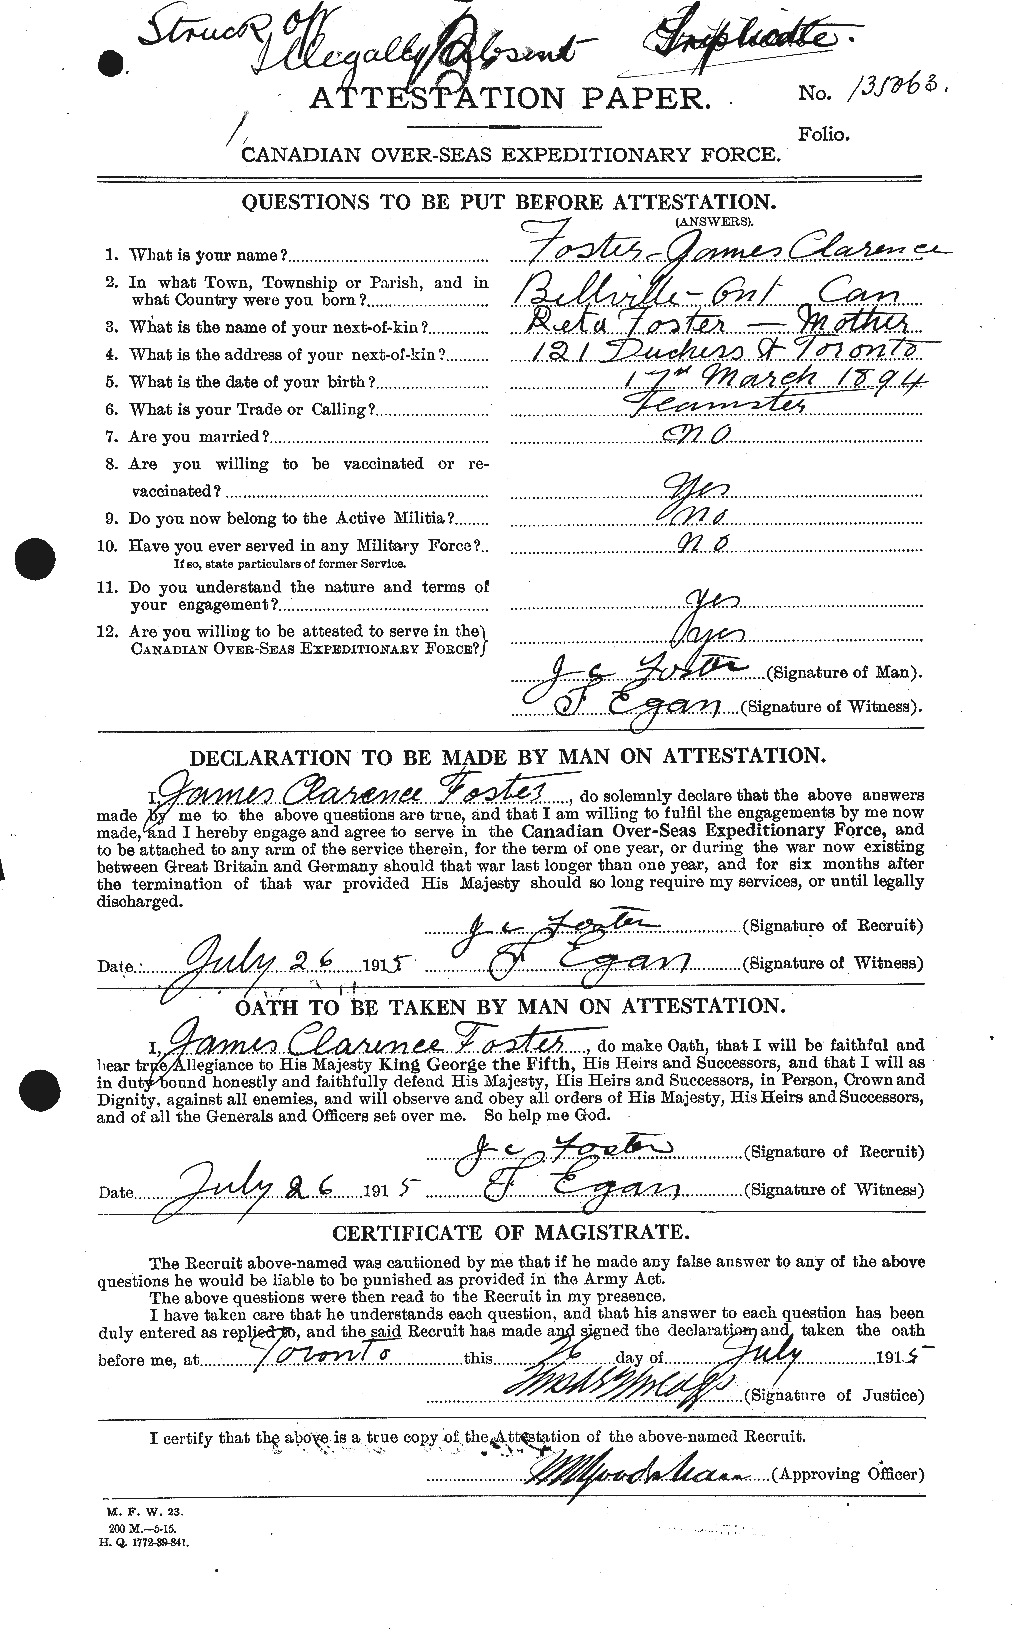 Personnel Records of the First World War - CEF 333301a